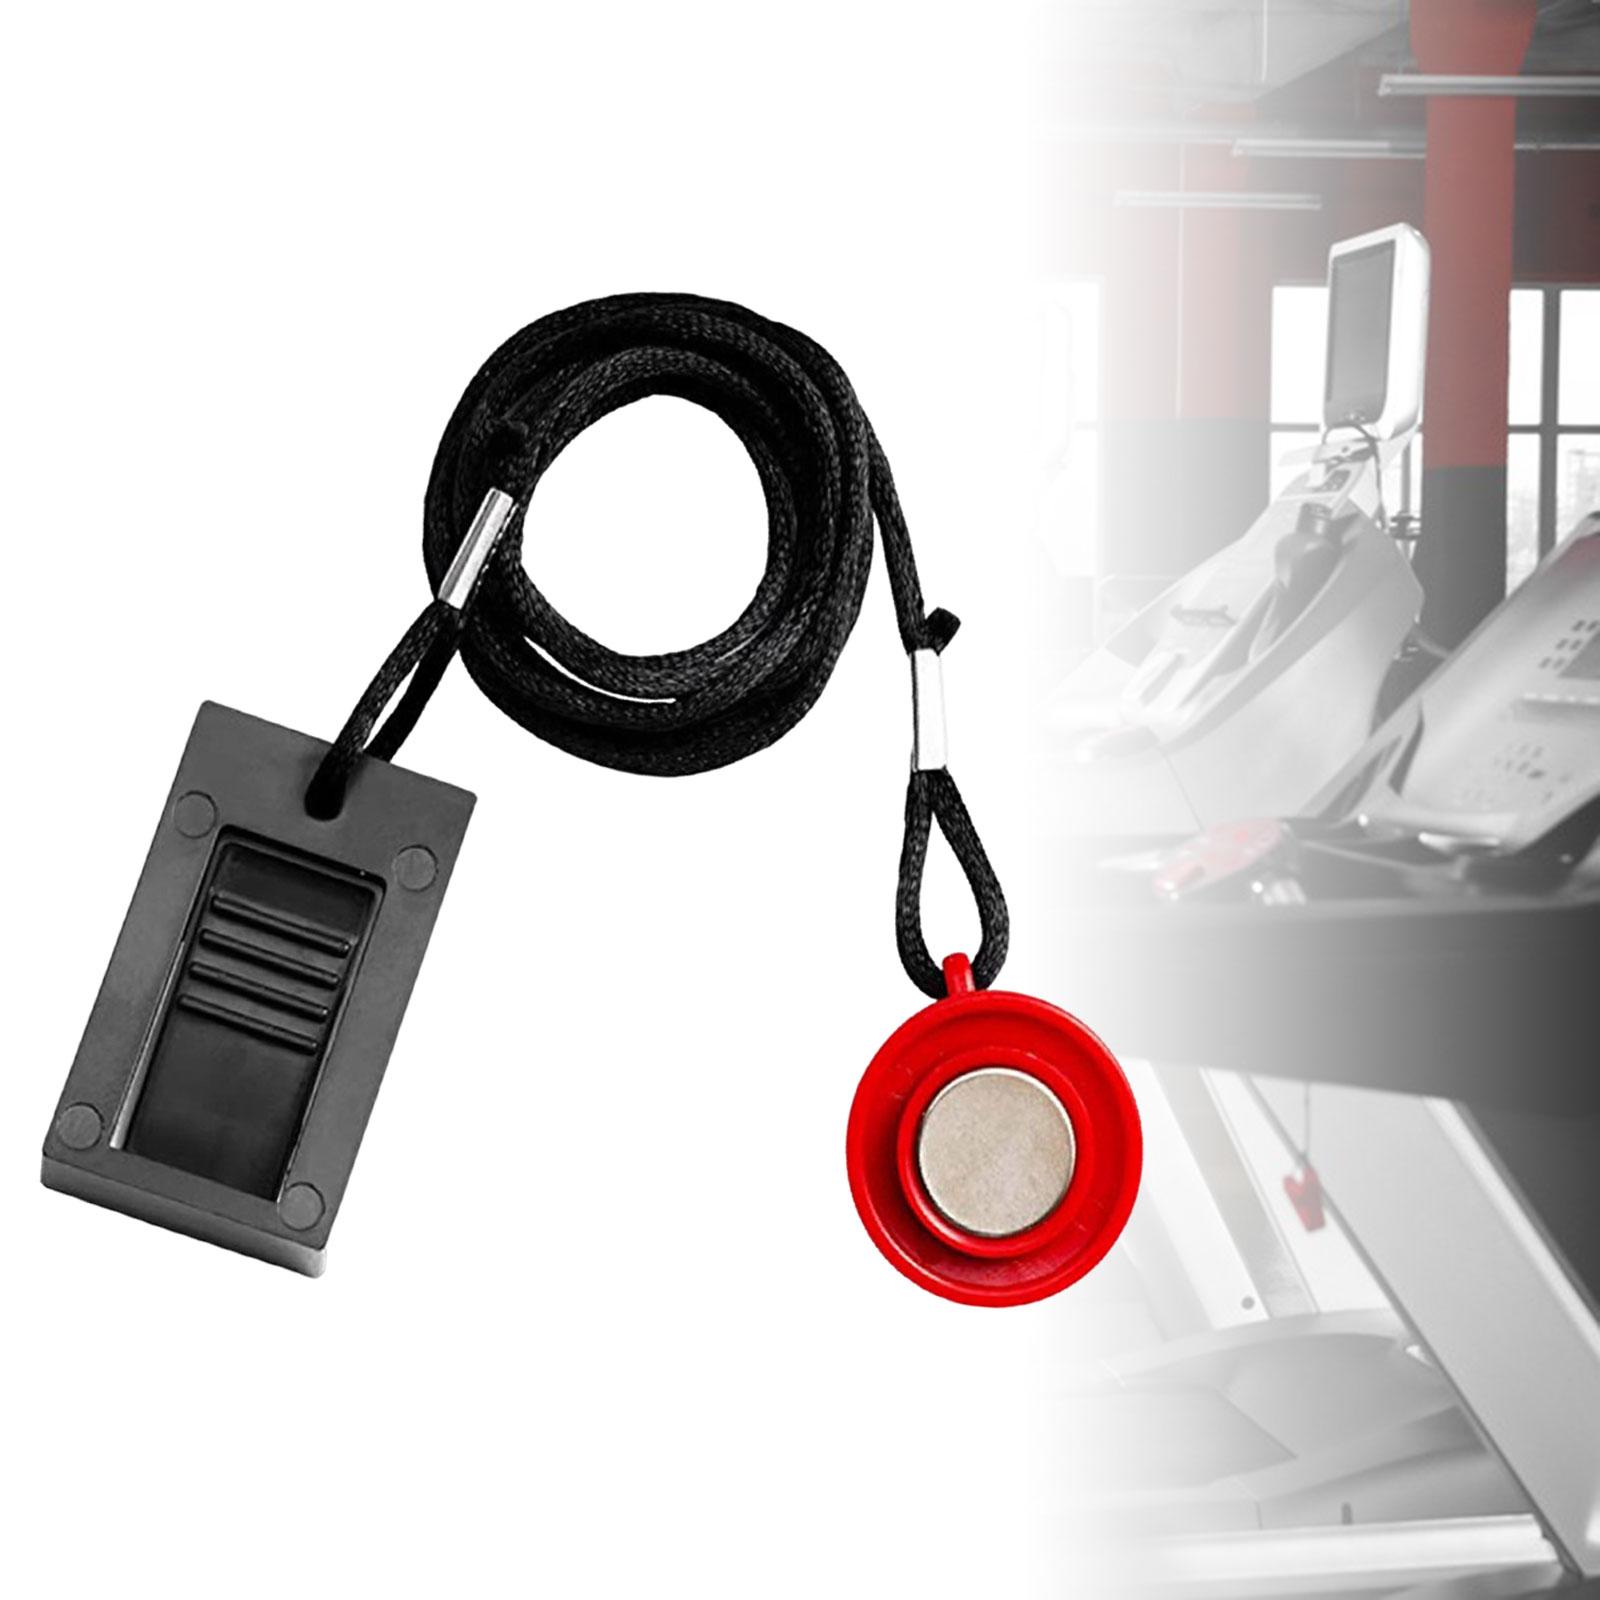 Treadmill Safety Keys Lock Round Switch Lock Exercise Magnet Security Switch Small Clamp